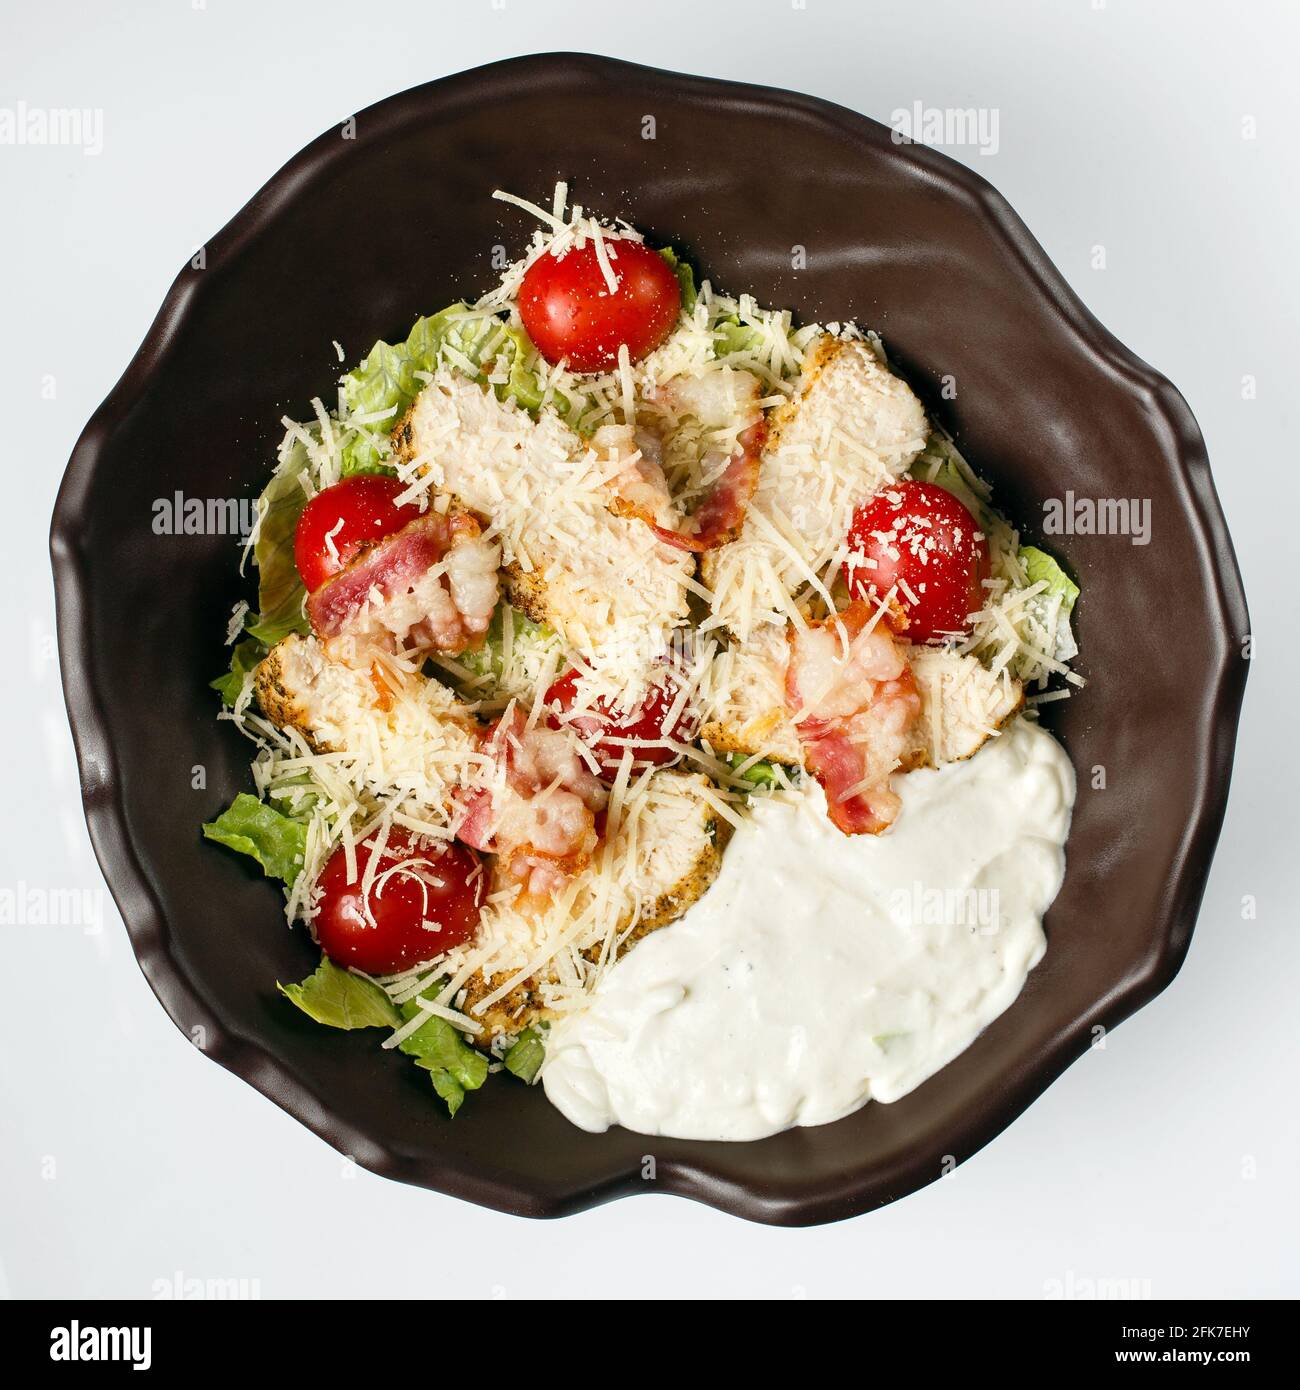 Caesar salad. Juicy slices of chicken steak, fresh lettuce, tomatoes, toasted bacon, parmesan and tender creamy dressing. Stock Photo